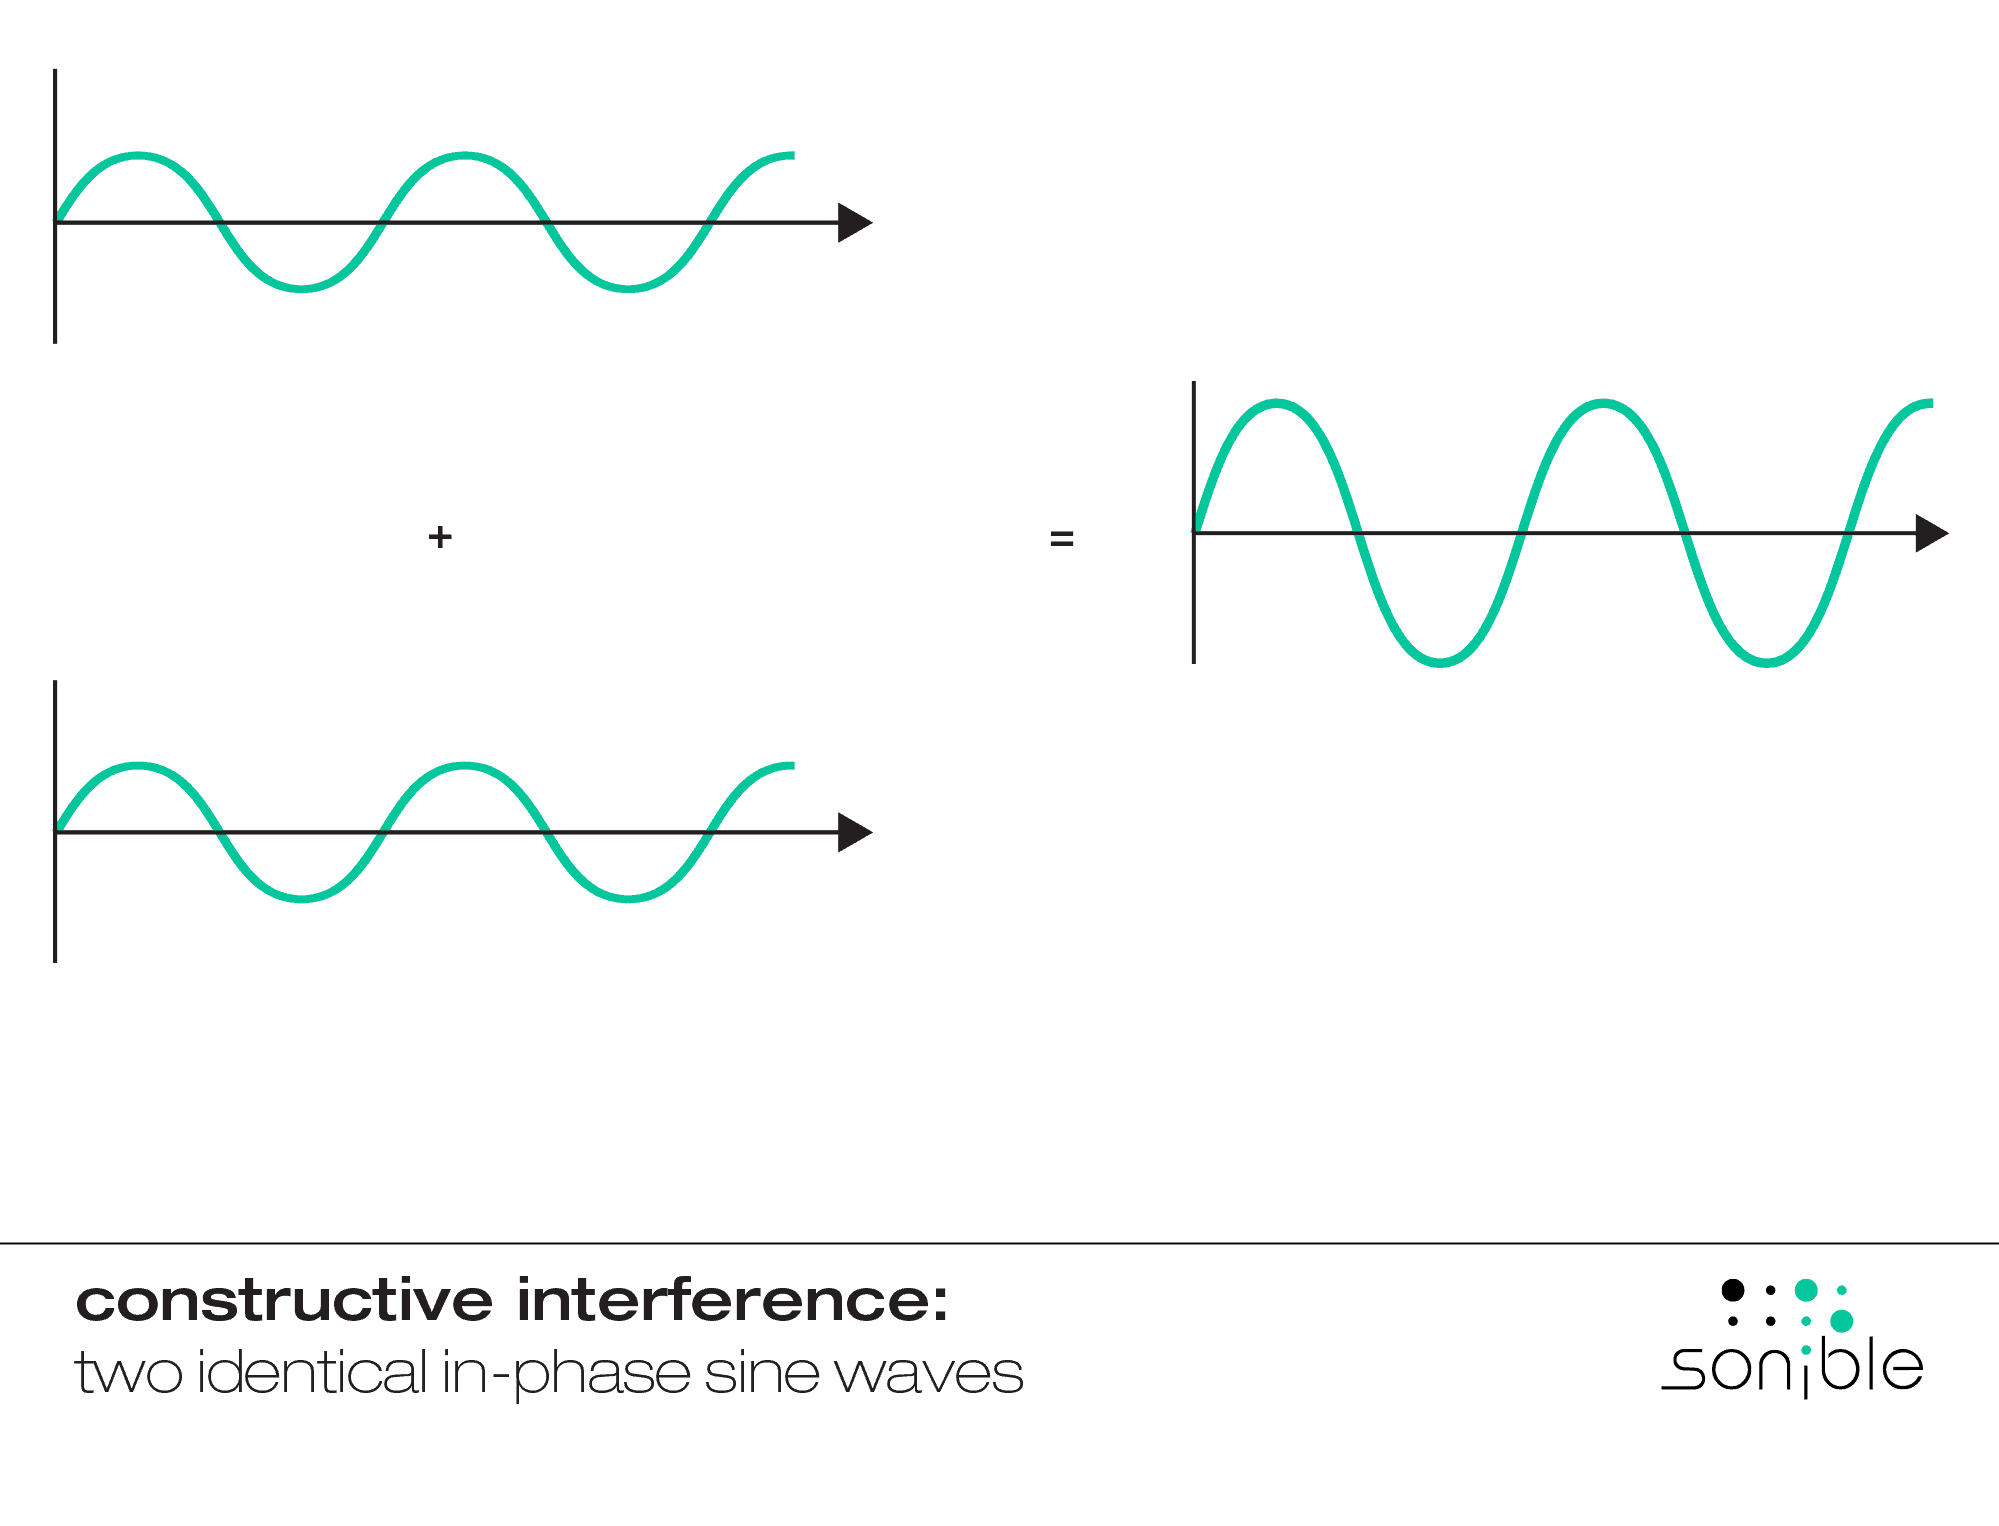 constructive interference occurs when two identical in-phase sine waves are added together 